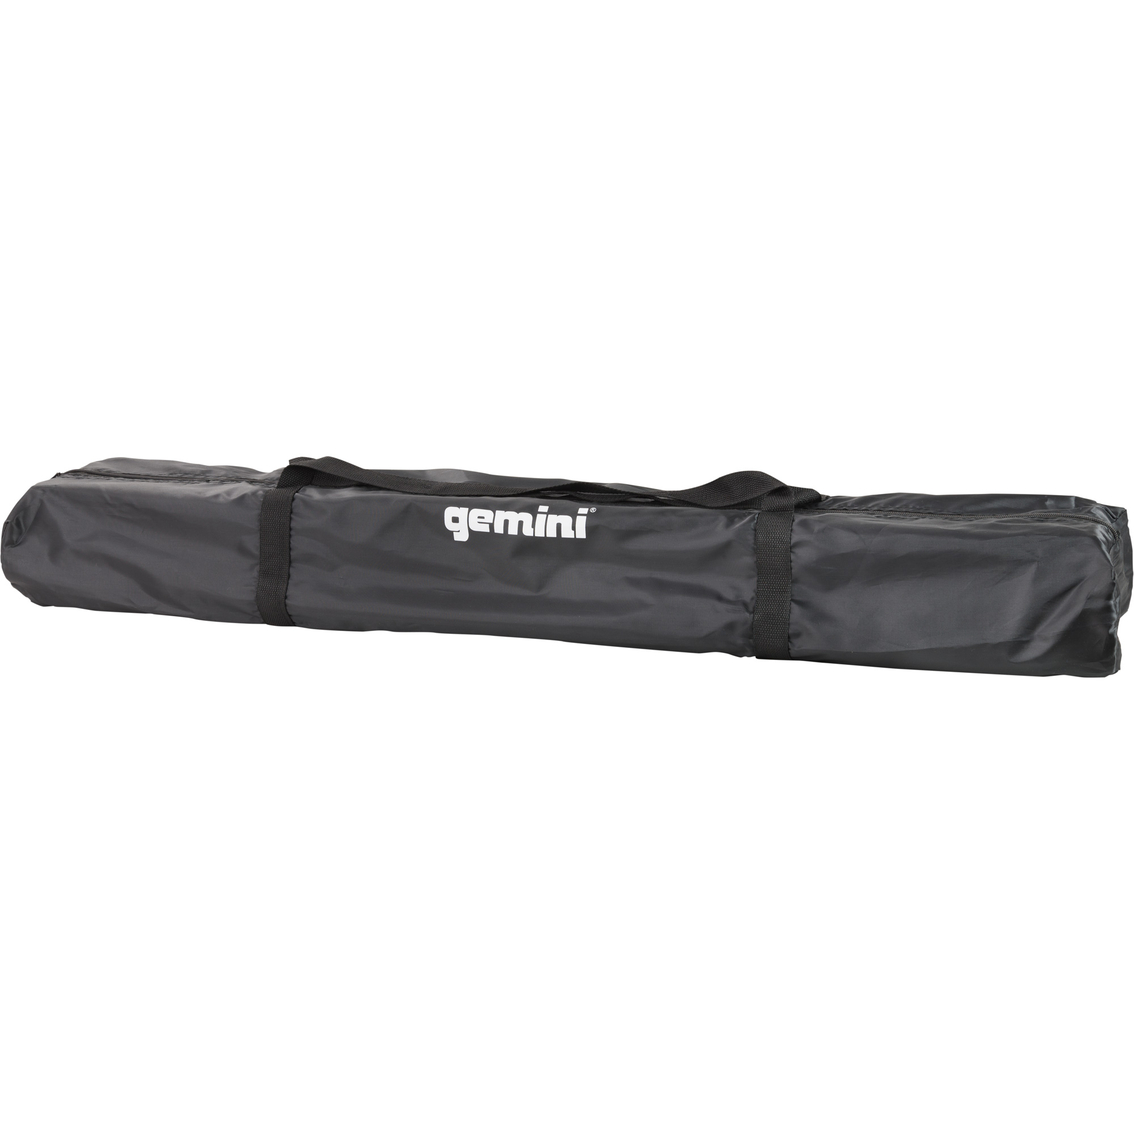 Gemini ST-PACK 2 Tripod Speaker Stands with Carry Bag - Image 3 of 3